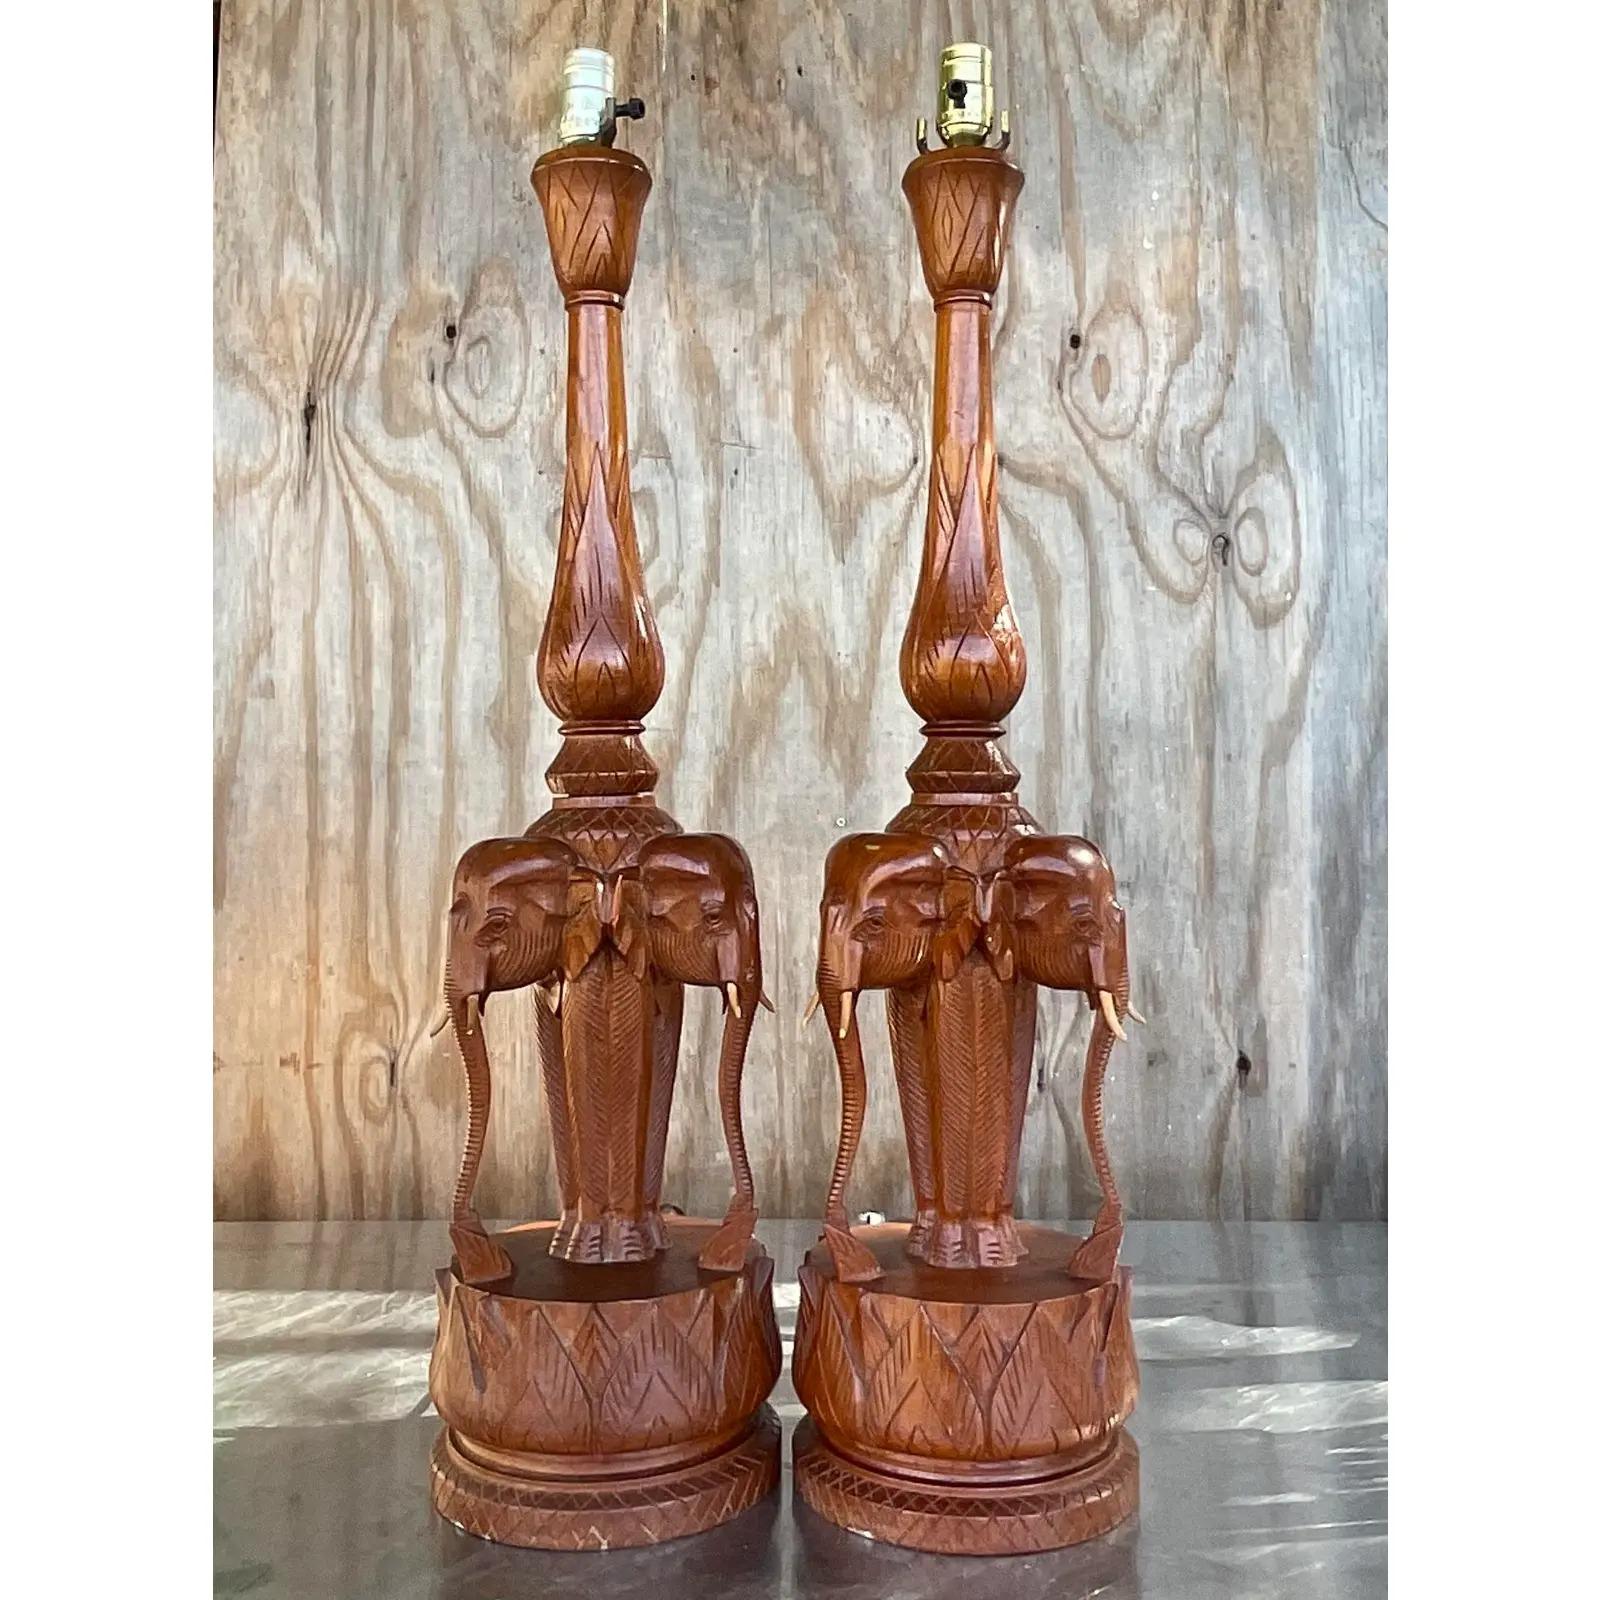 An incredible pair of hand carved table lamps. They highly coveted trio of elephants with all their tusks intact! A rare find. Acquired from a Palm Beach estate.

The lamps are in great vintage condition. Minor scuffs an blemishes appropriate to